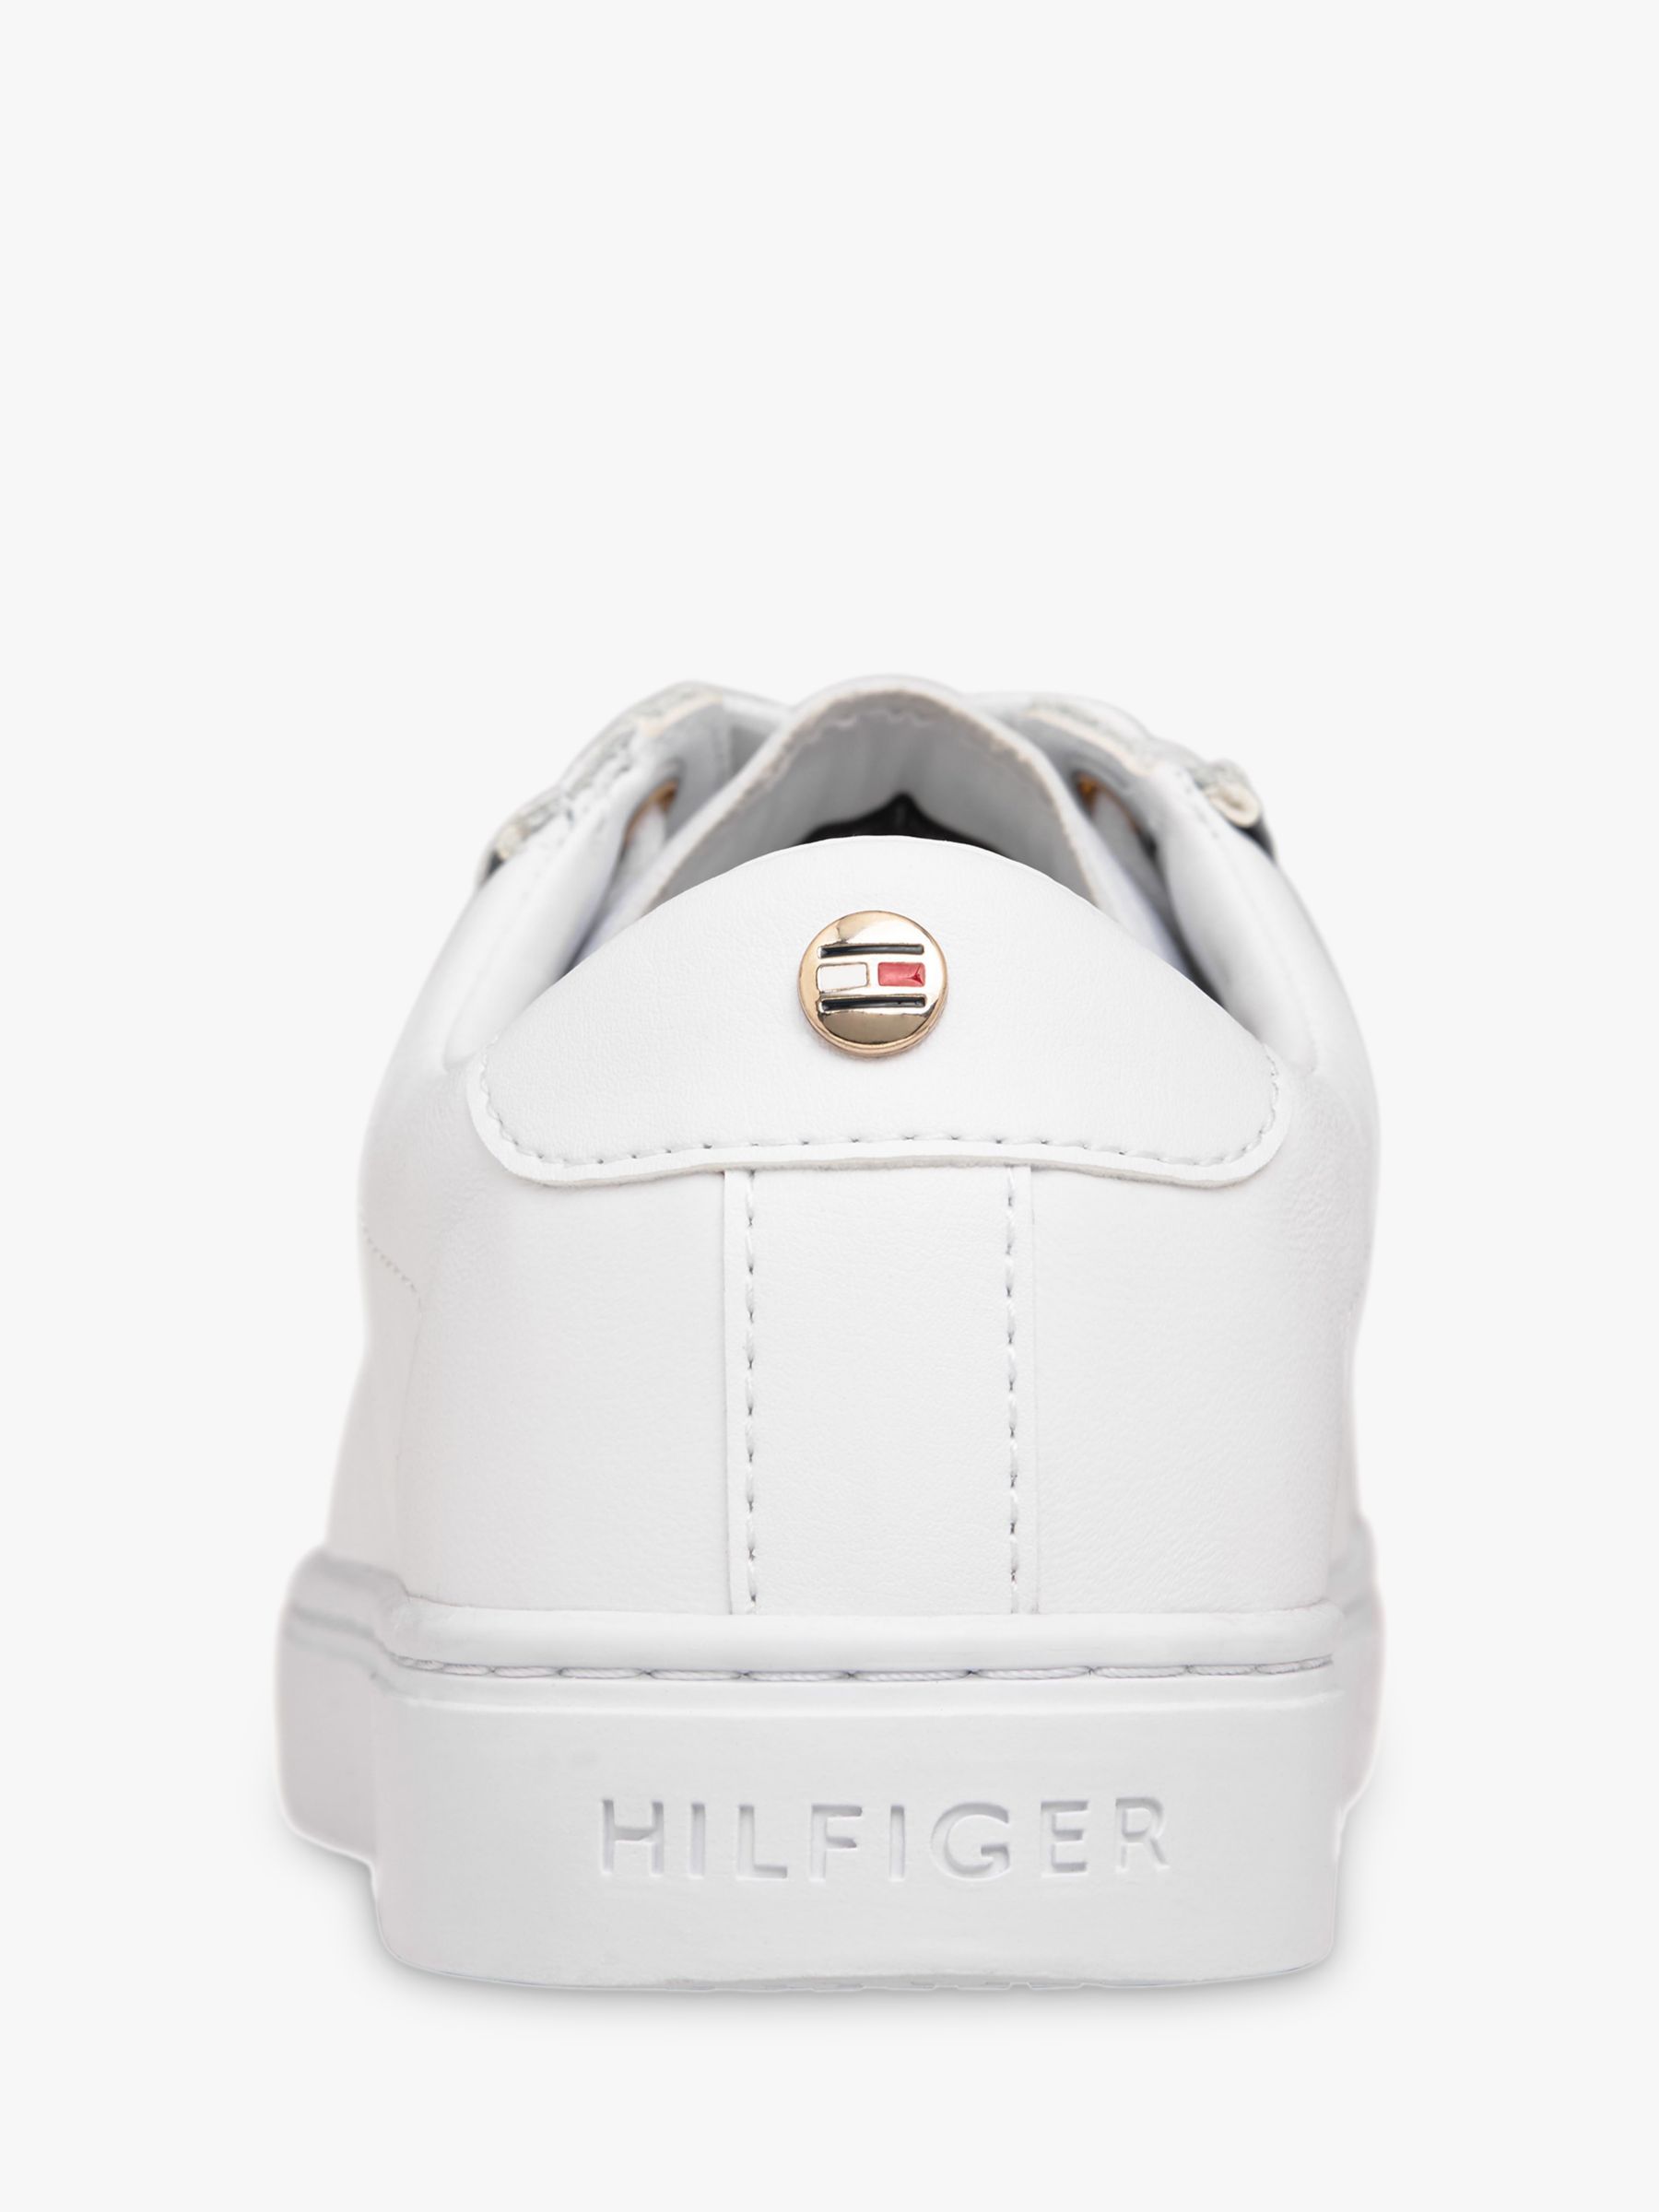 Buy Tommy Hilfiger Signature Leather Trainers, White Online at johnlewis.com